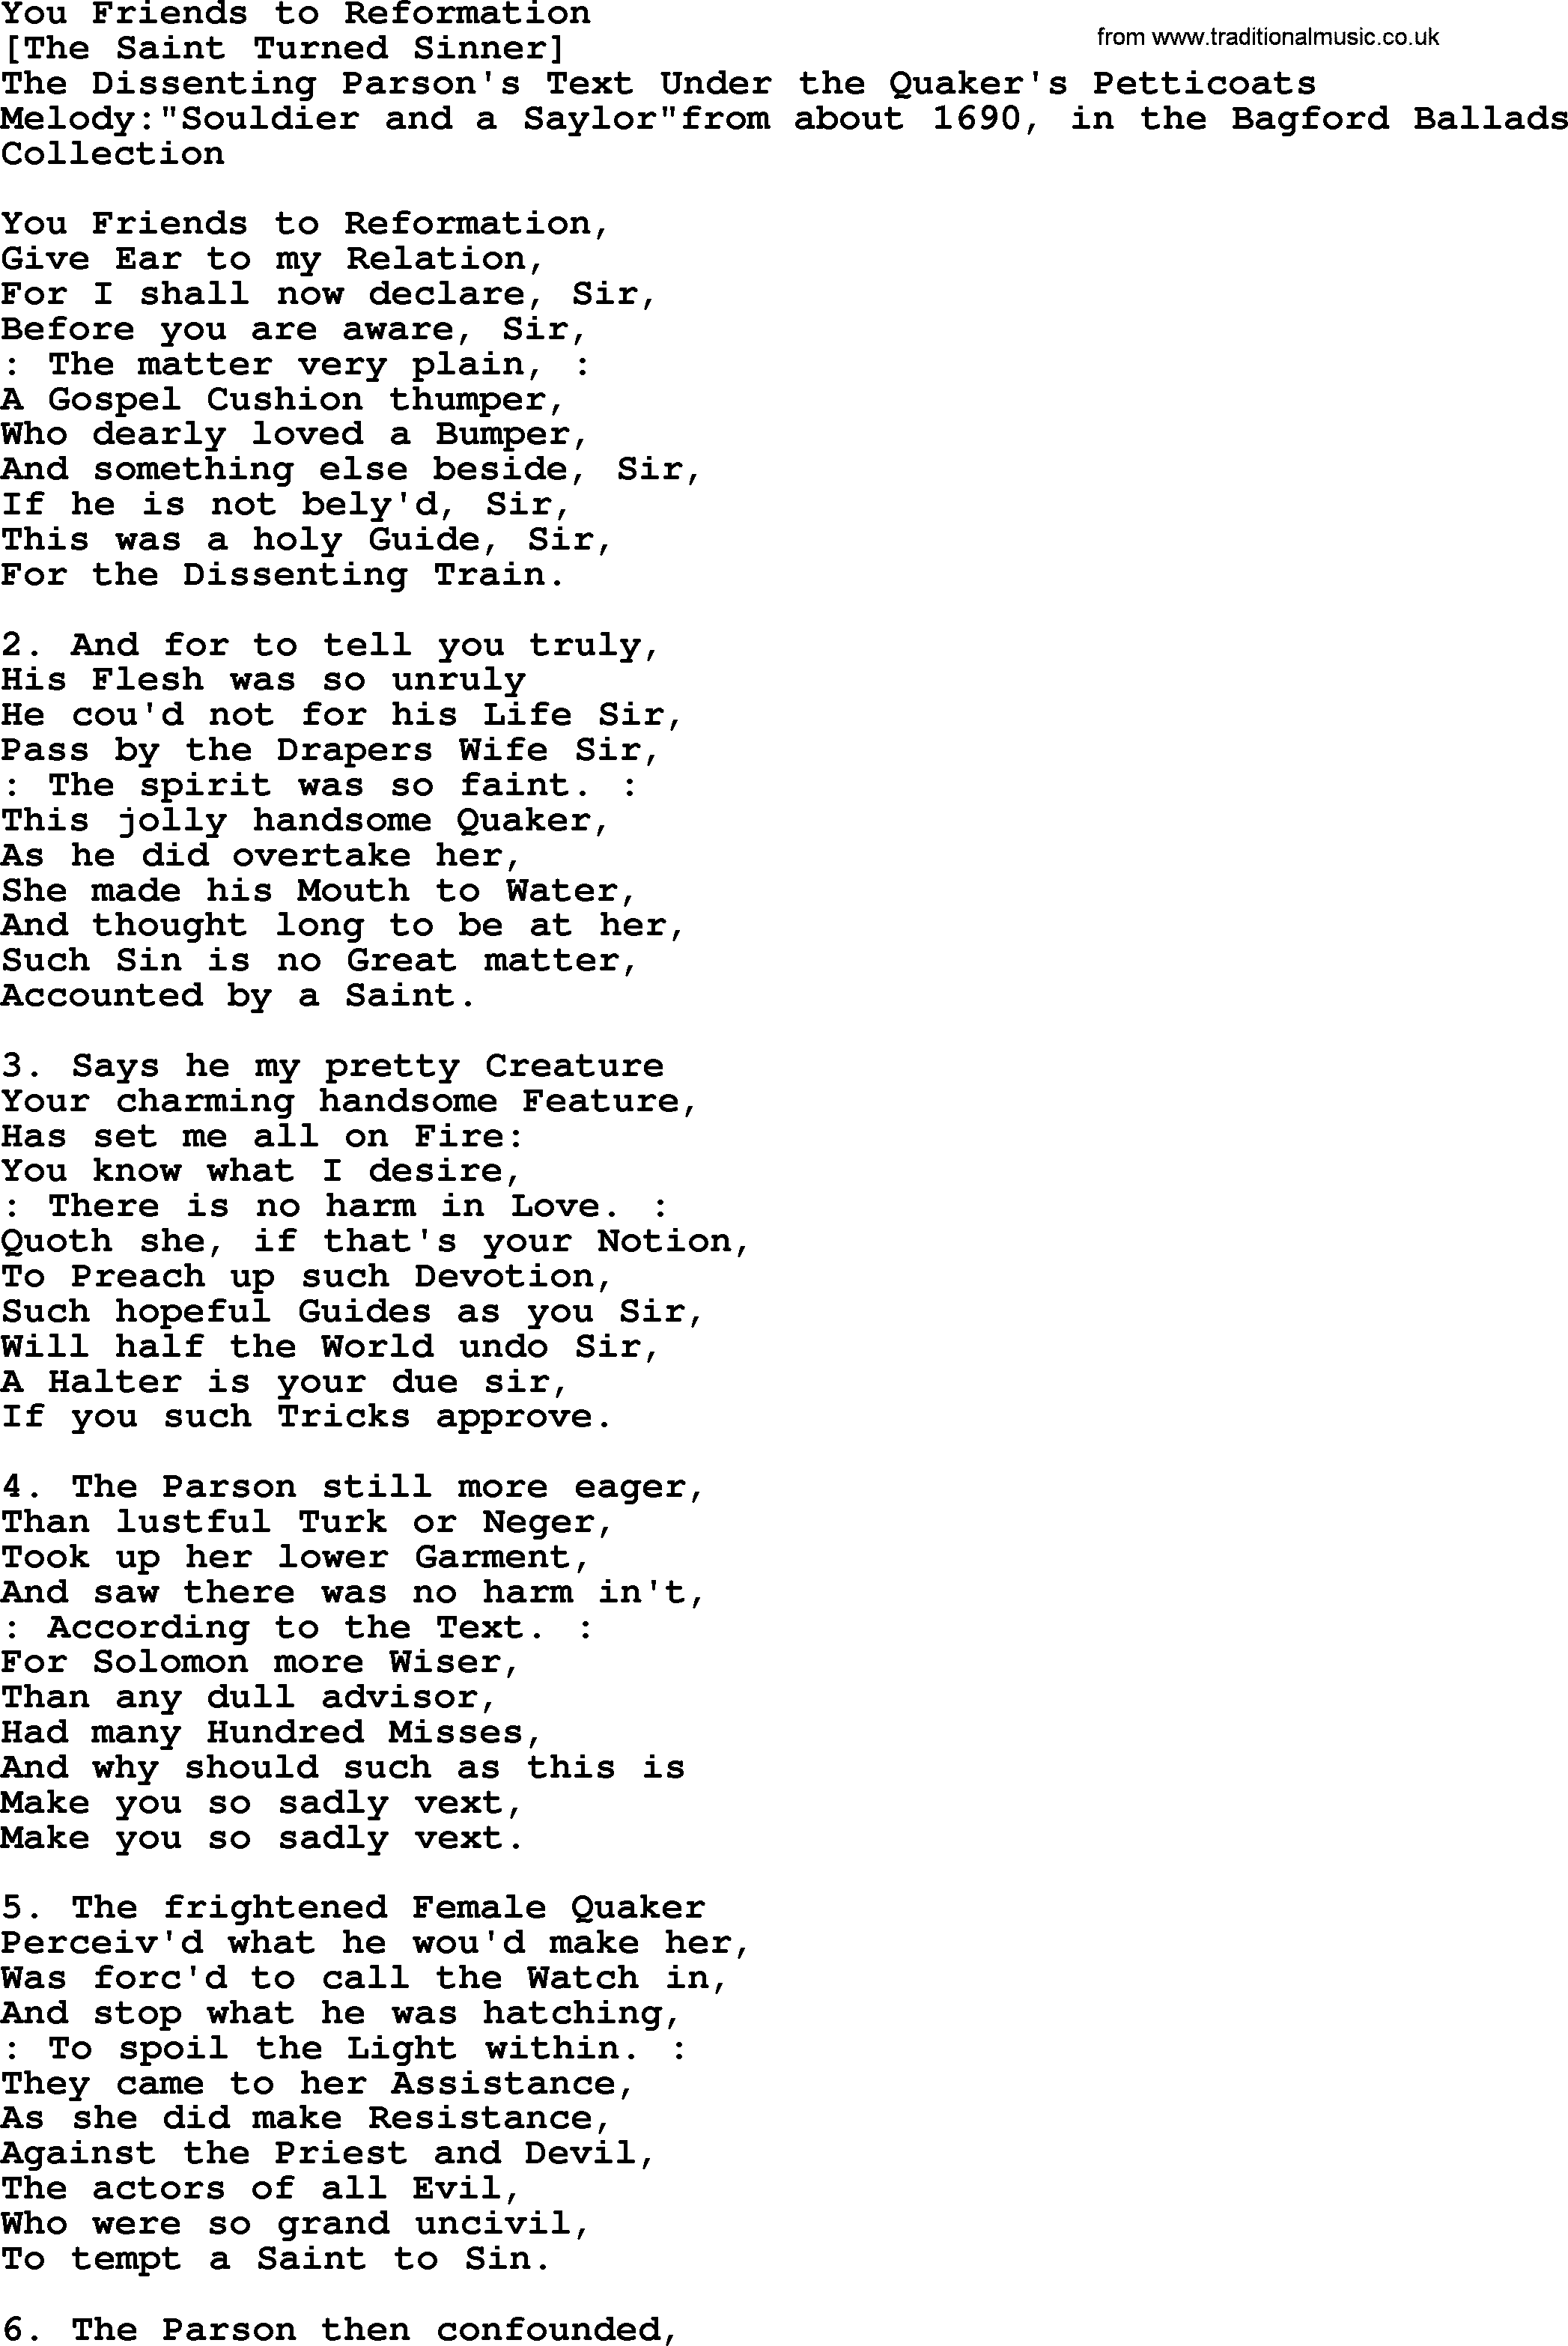 Old English Song: You Friends To Reformation lyrics